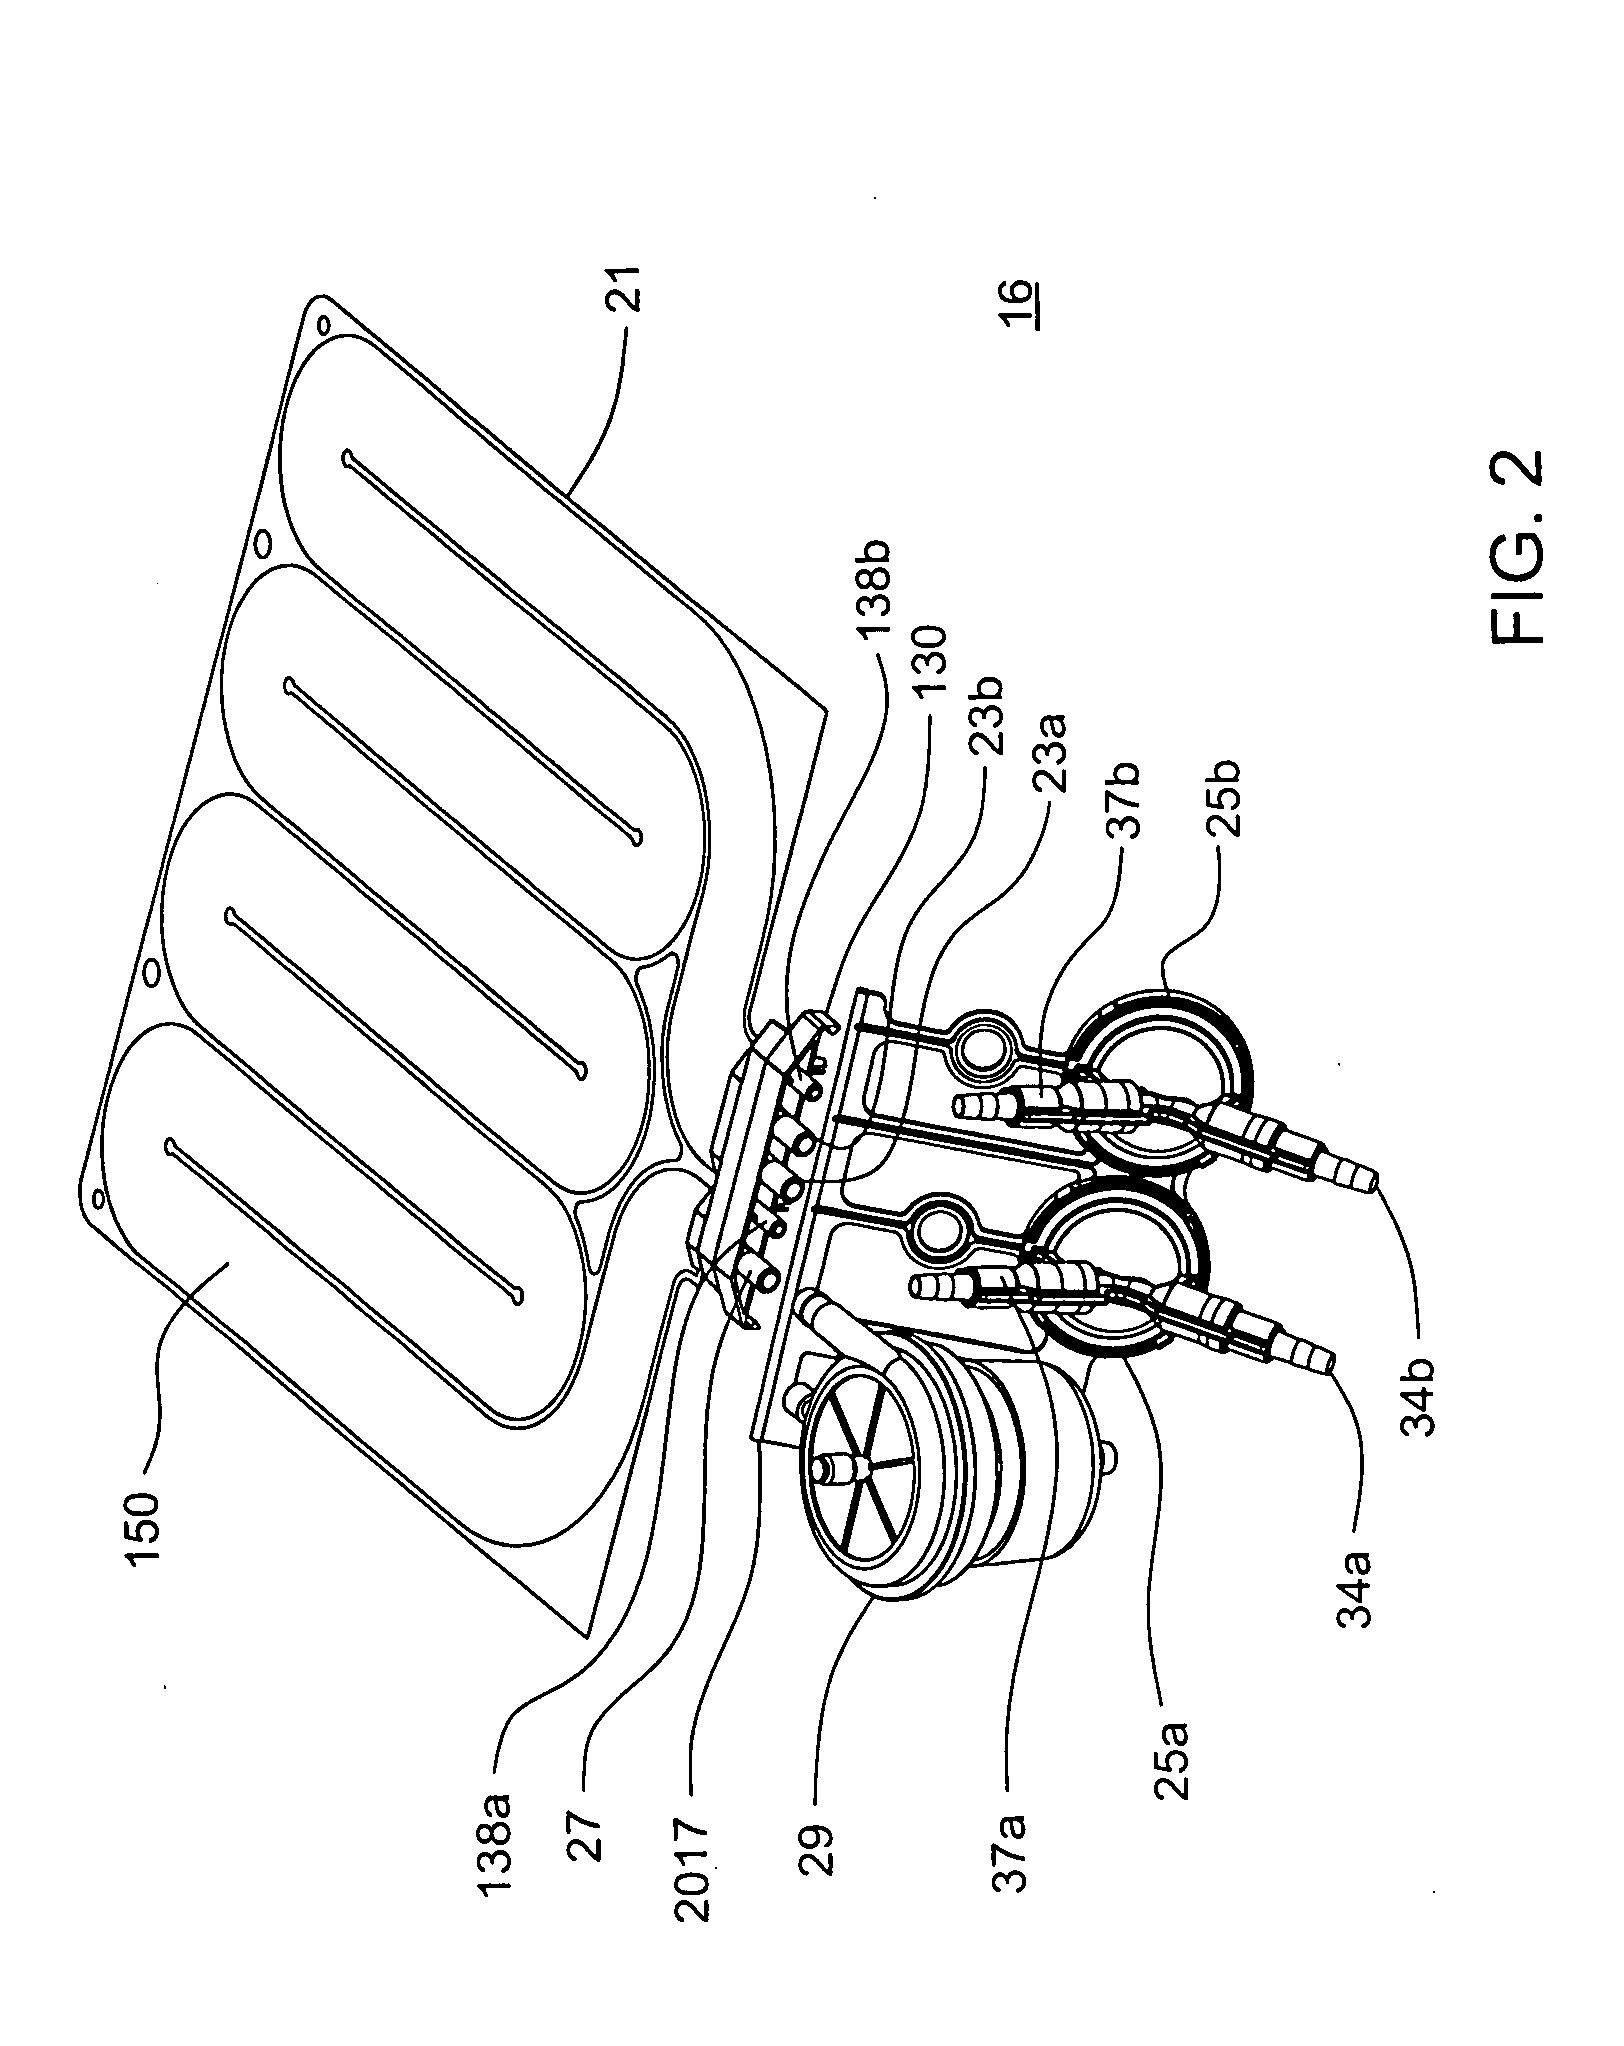 Fluid pumping systems, devices and methods